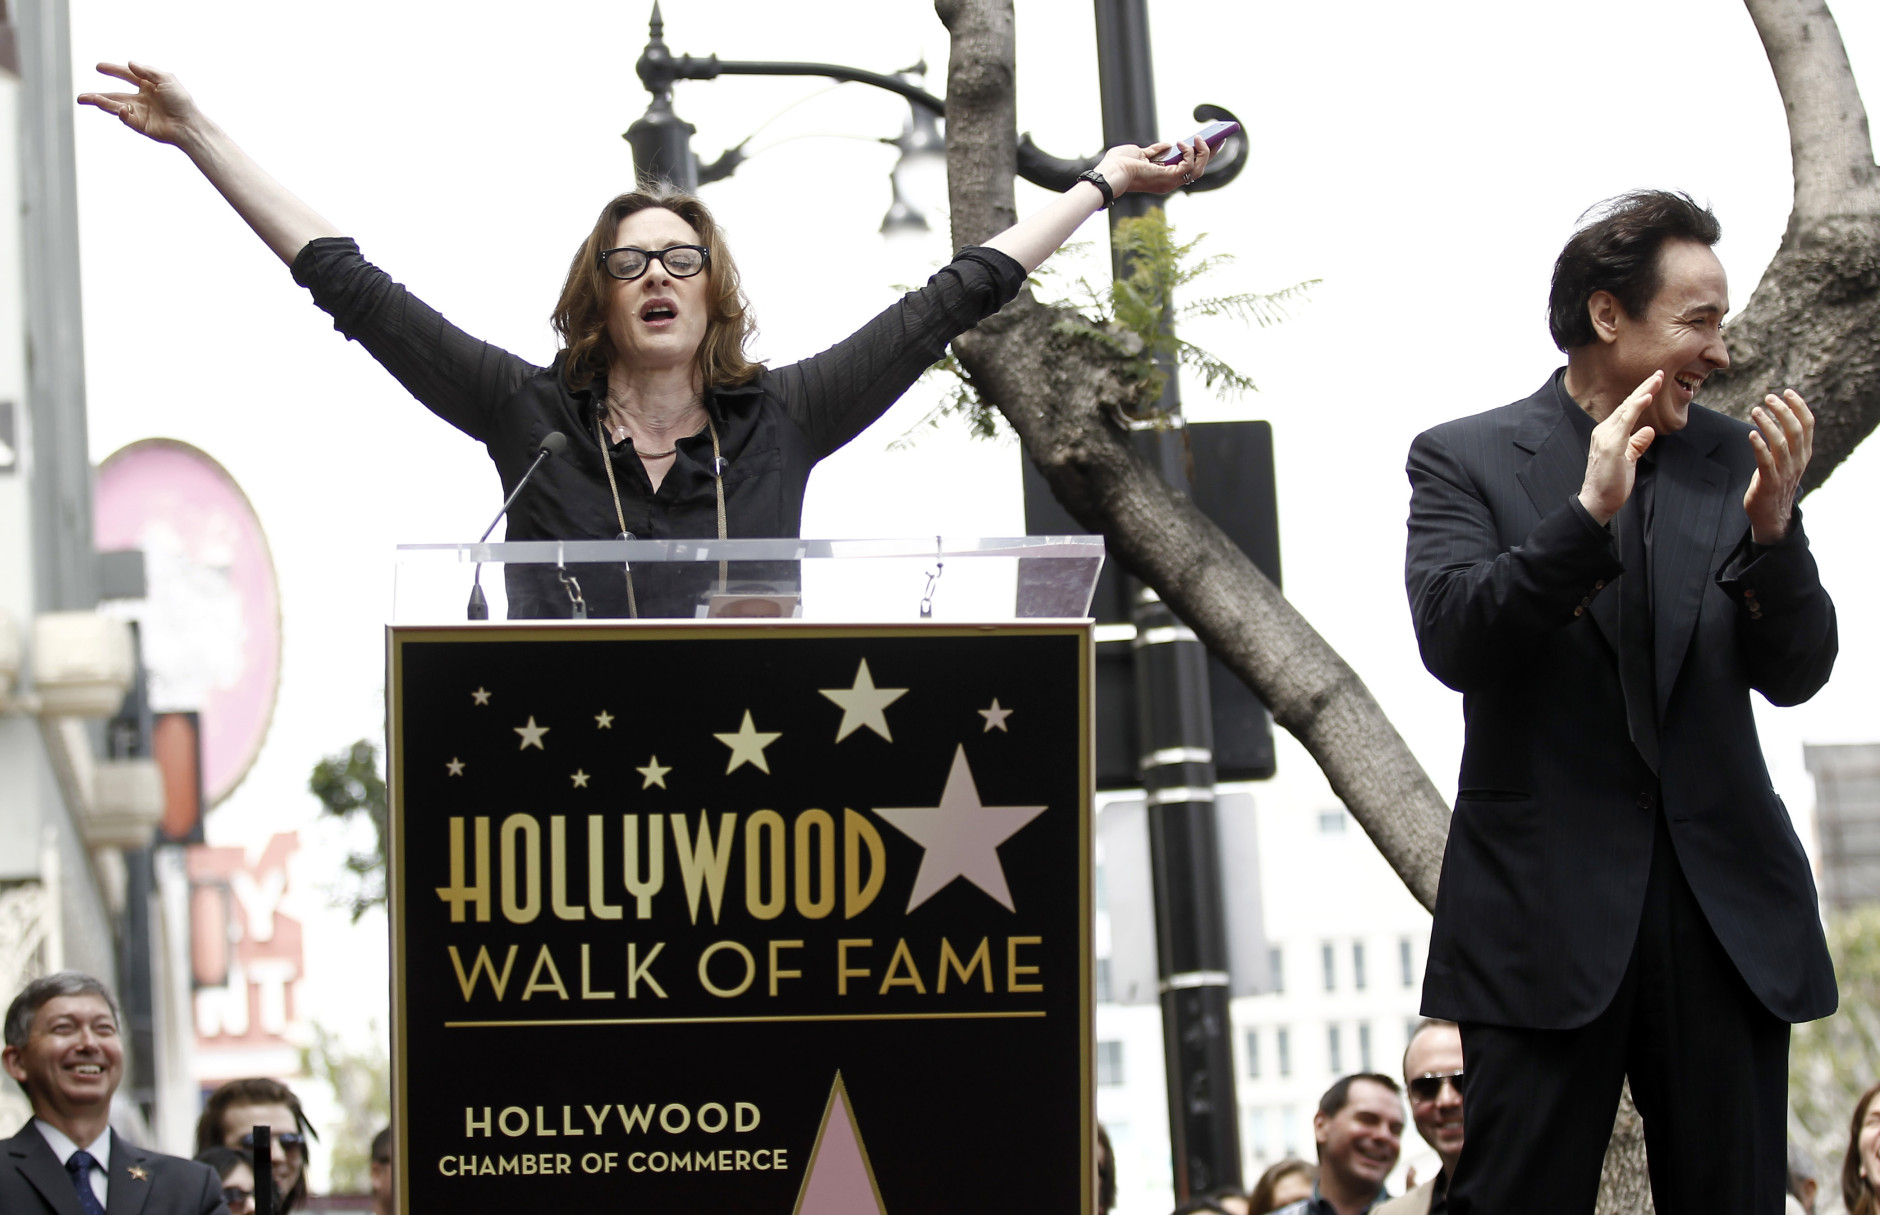 Actress Joan Cusack, left, speaks before her brother John Cusack received a star on the Hollywood Walk of Fame in Los Angeles, Tuesday, April 24, 2012. Cusack stars in "The Raven" which opens in theaters April 27. (AP Photo/Matt Sayles)